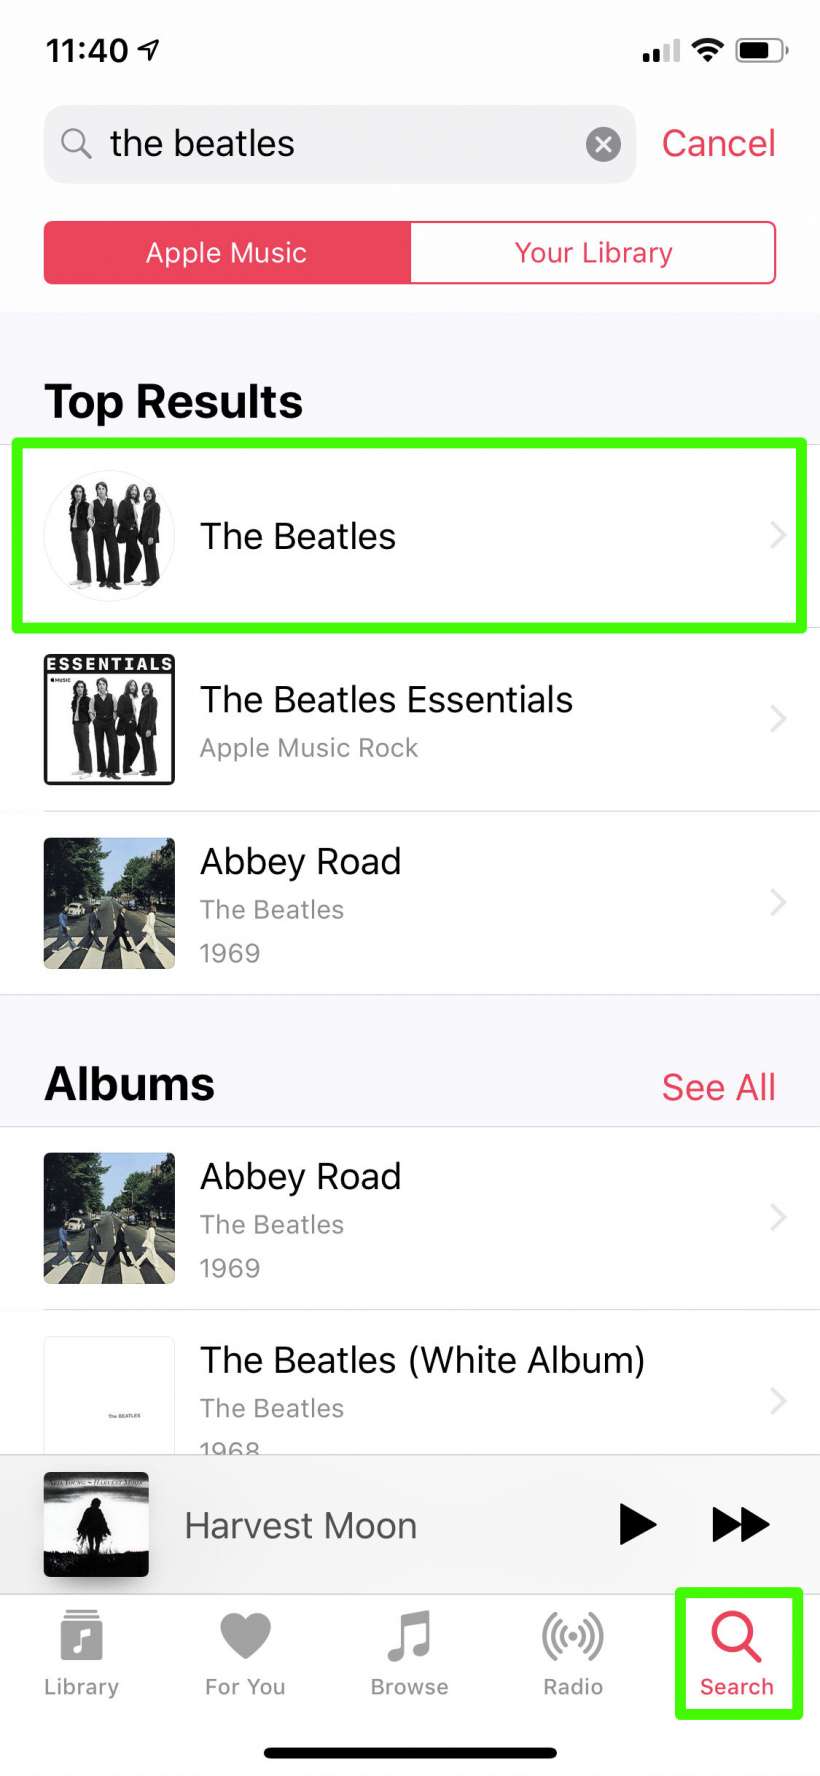 How to create and customize and Apple Music radio station on iPhone and iPad.